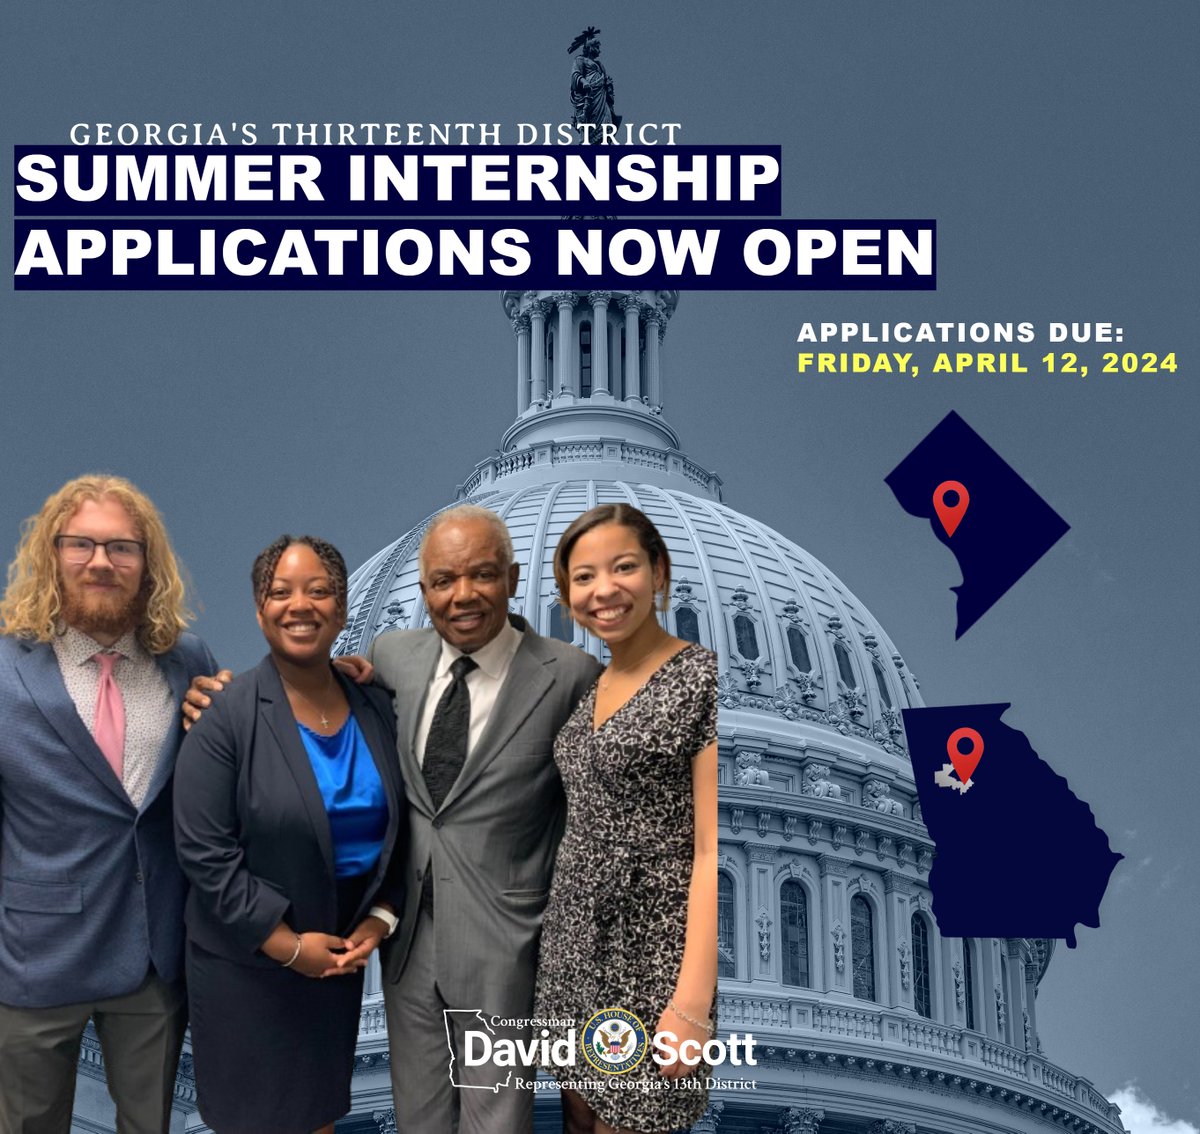 College Students and Recent Graduates: gain experience in legislative affairs, communications, or community outreach by applying to my Summer Internship! Apply TODAY to join our #GA13 team for a semester-long internship in Washington or Riverdale. davidscott.house.gov/constituent-se…